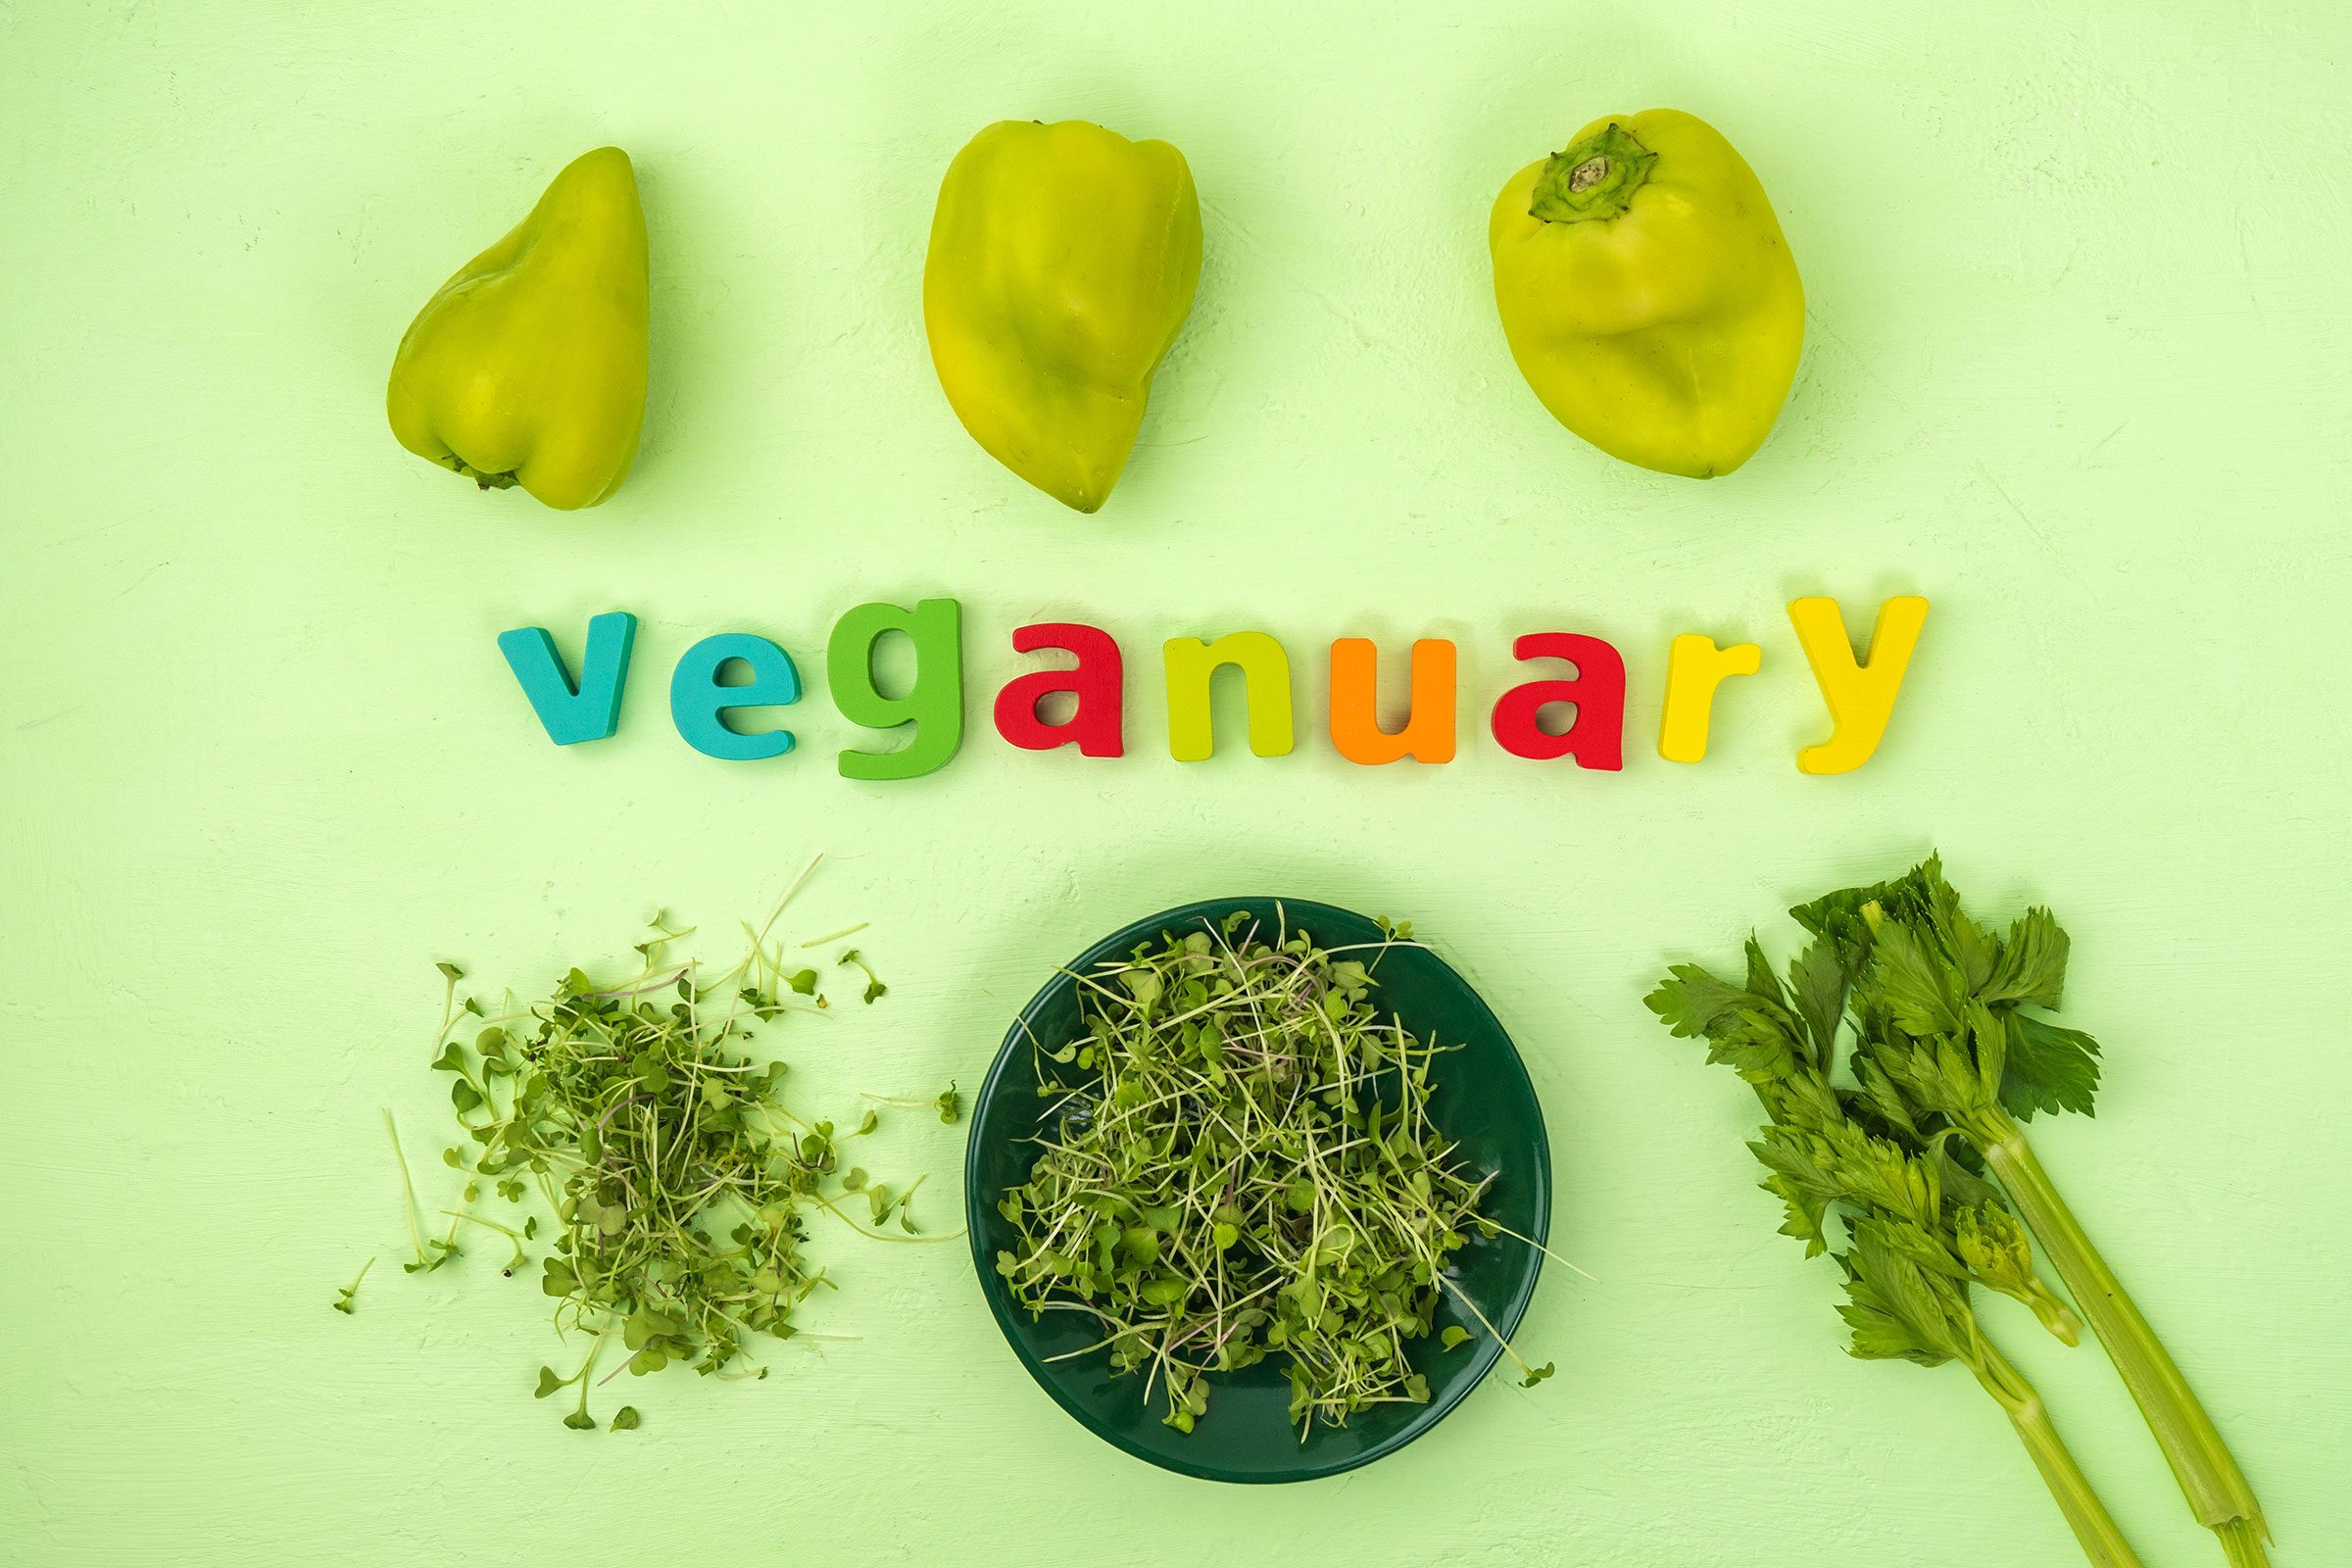 What Is Veganuary?